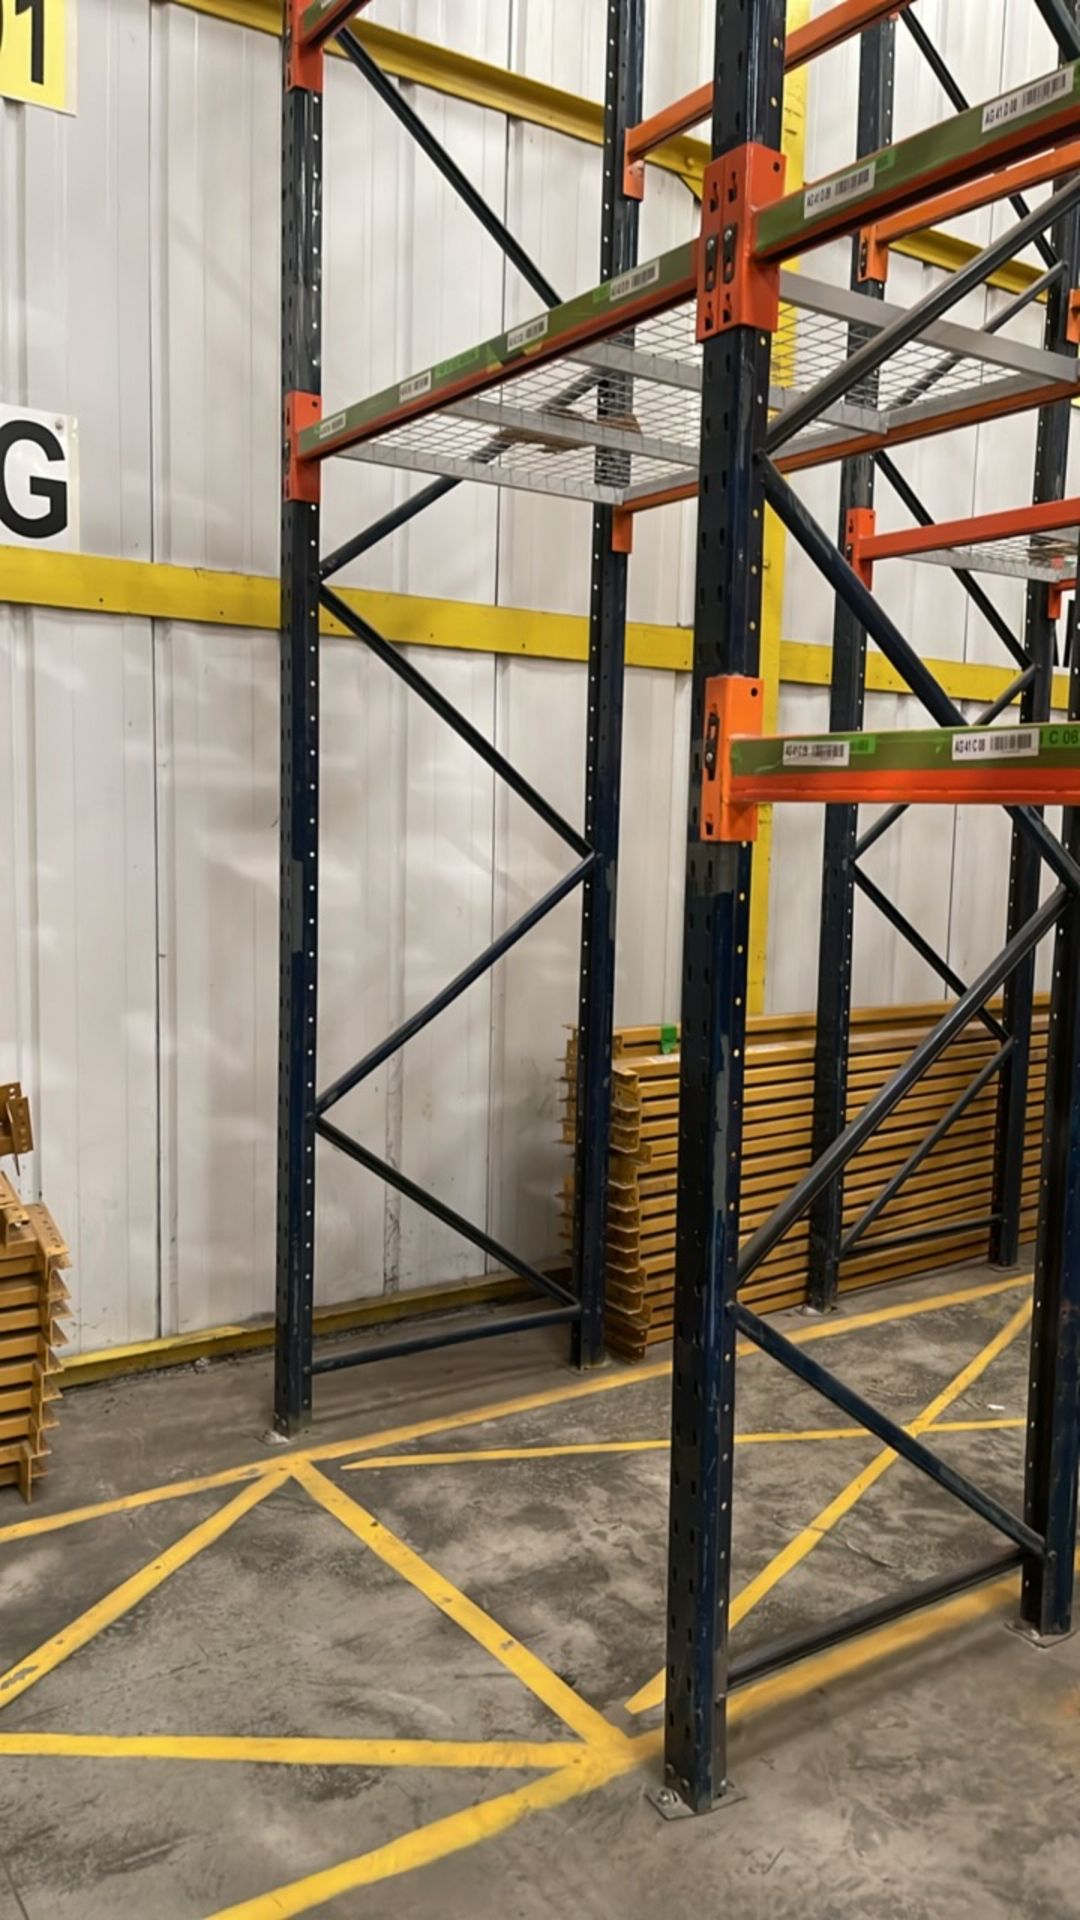 Run Of 44 Bays Of Back To Back Boltless Industrial Pallet Racking - Image 12 of 12